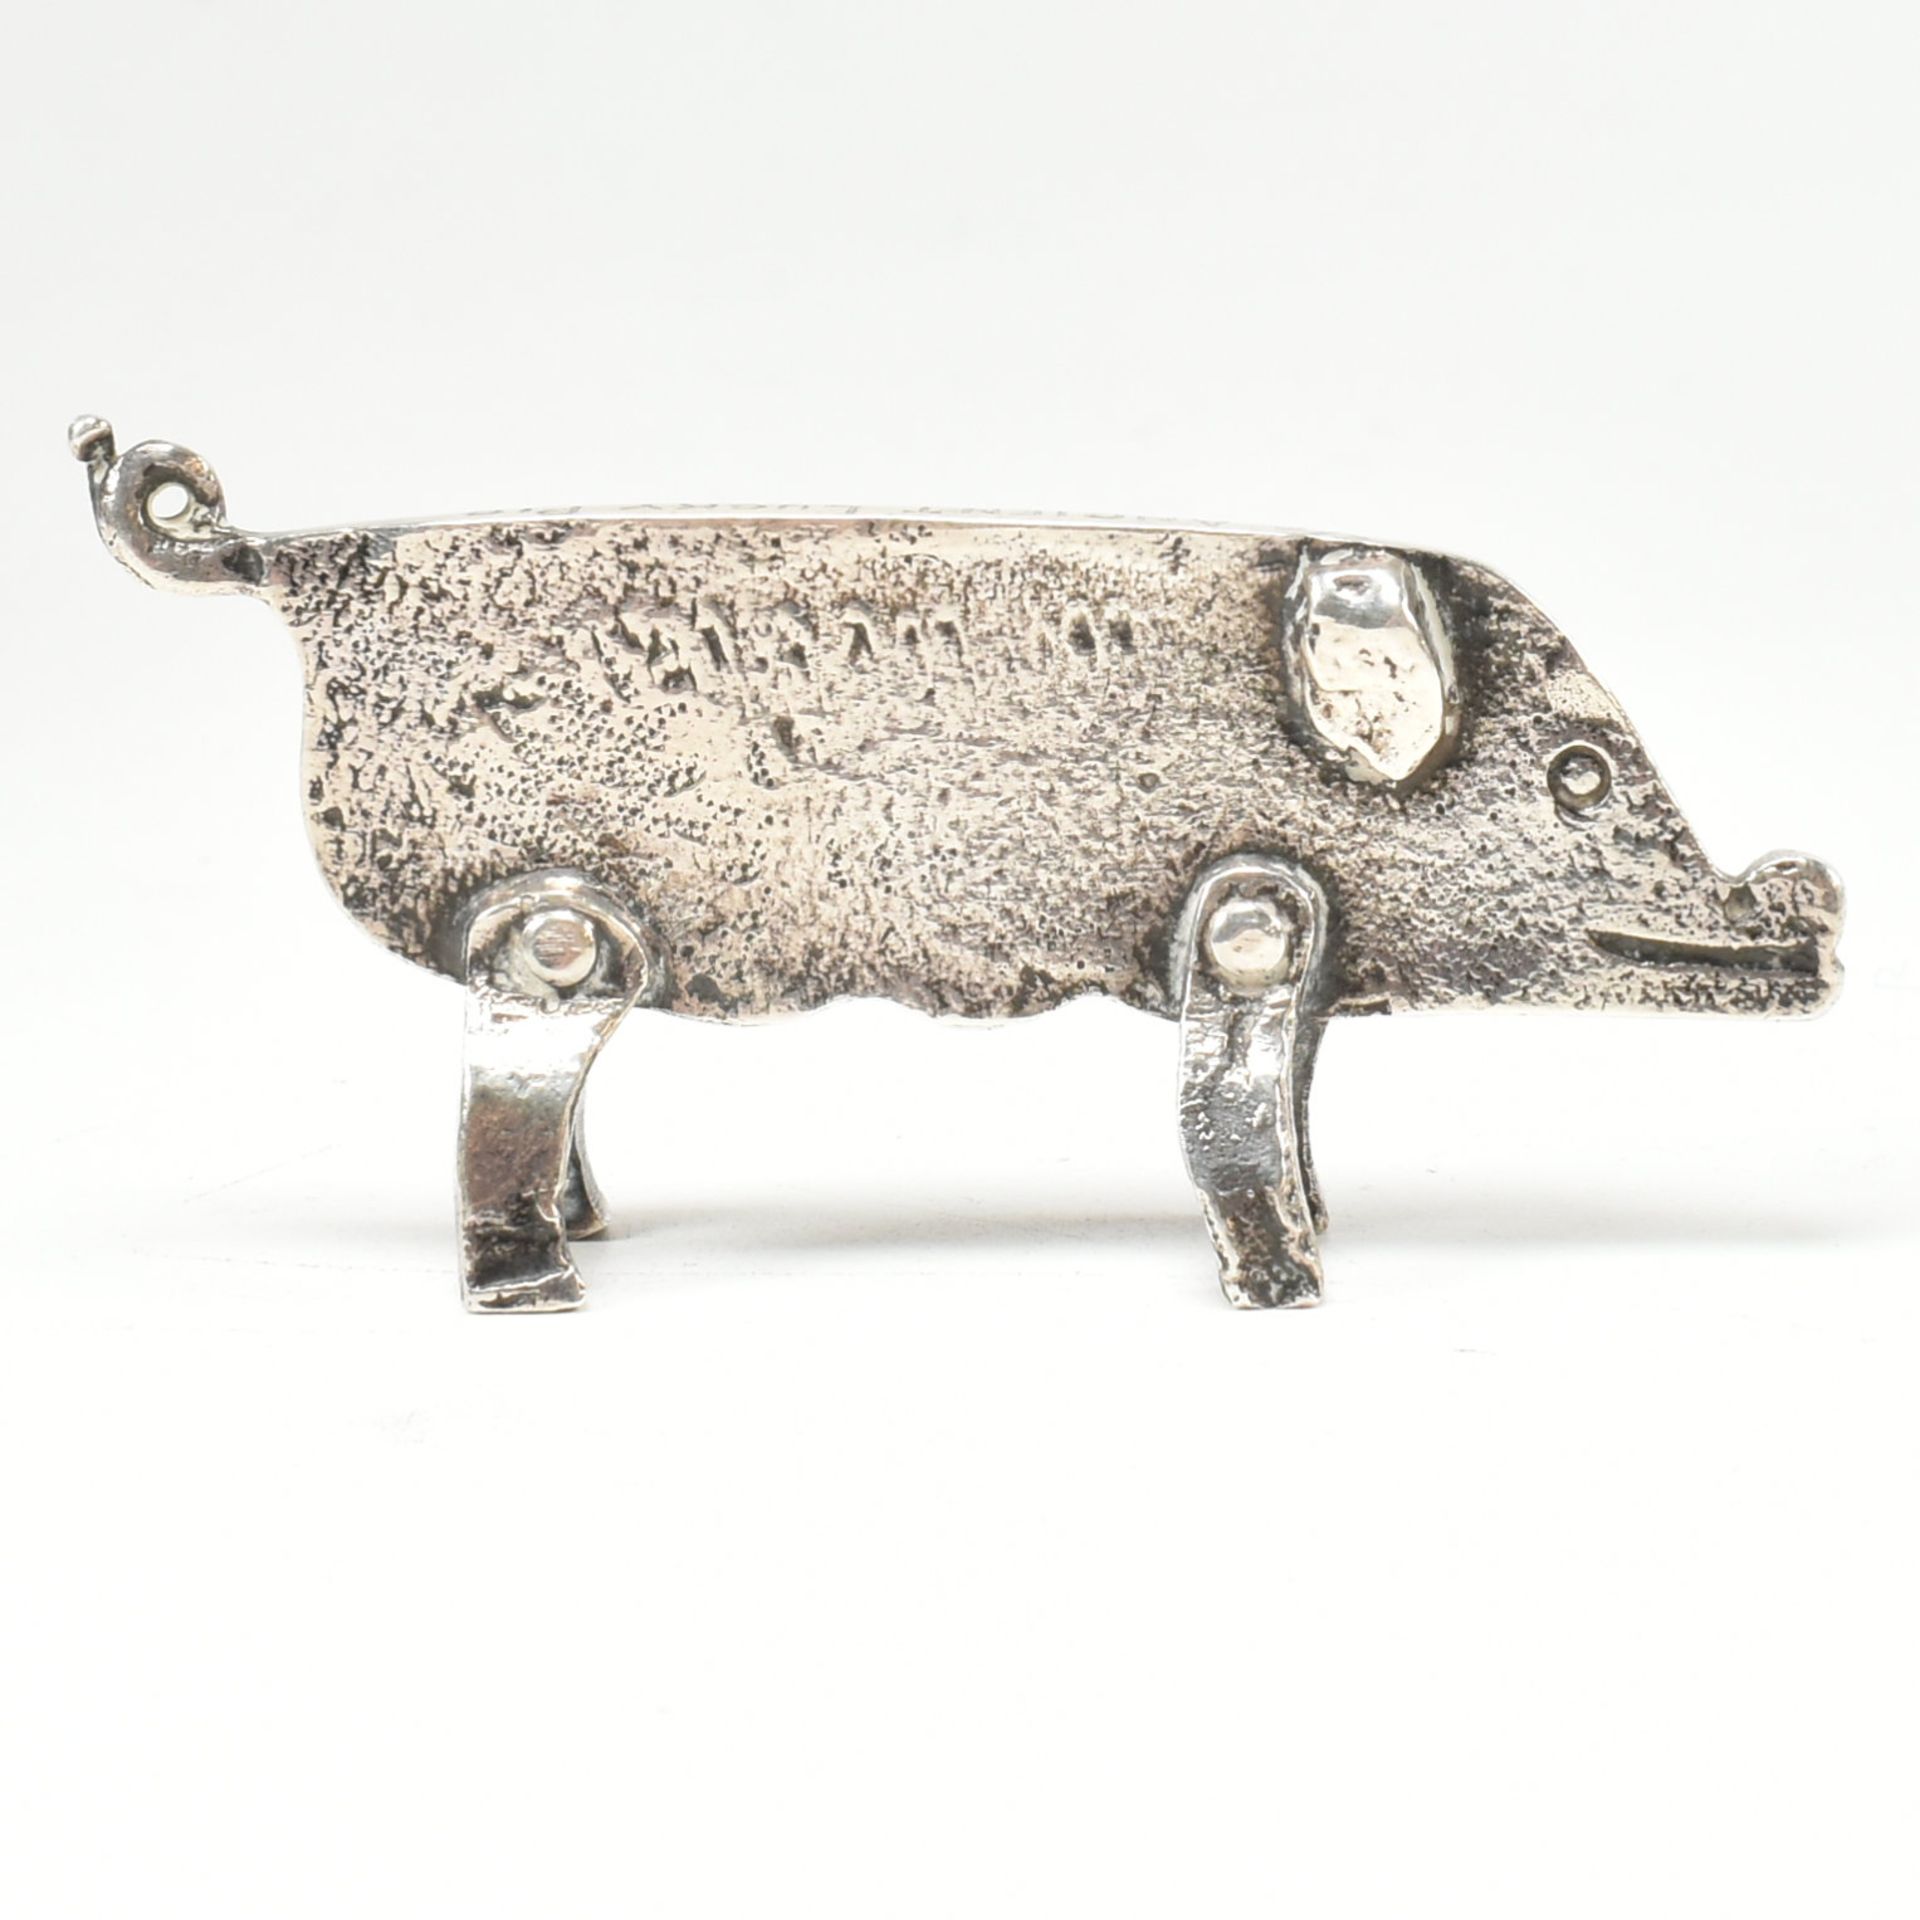 ARTS & CRAFTS EARLY 20TH CENTURY LUCKY PIG FIGURINE - Image 2 of 6